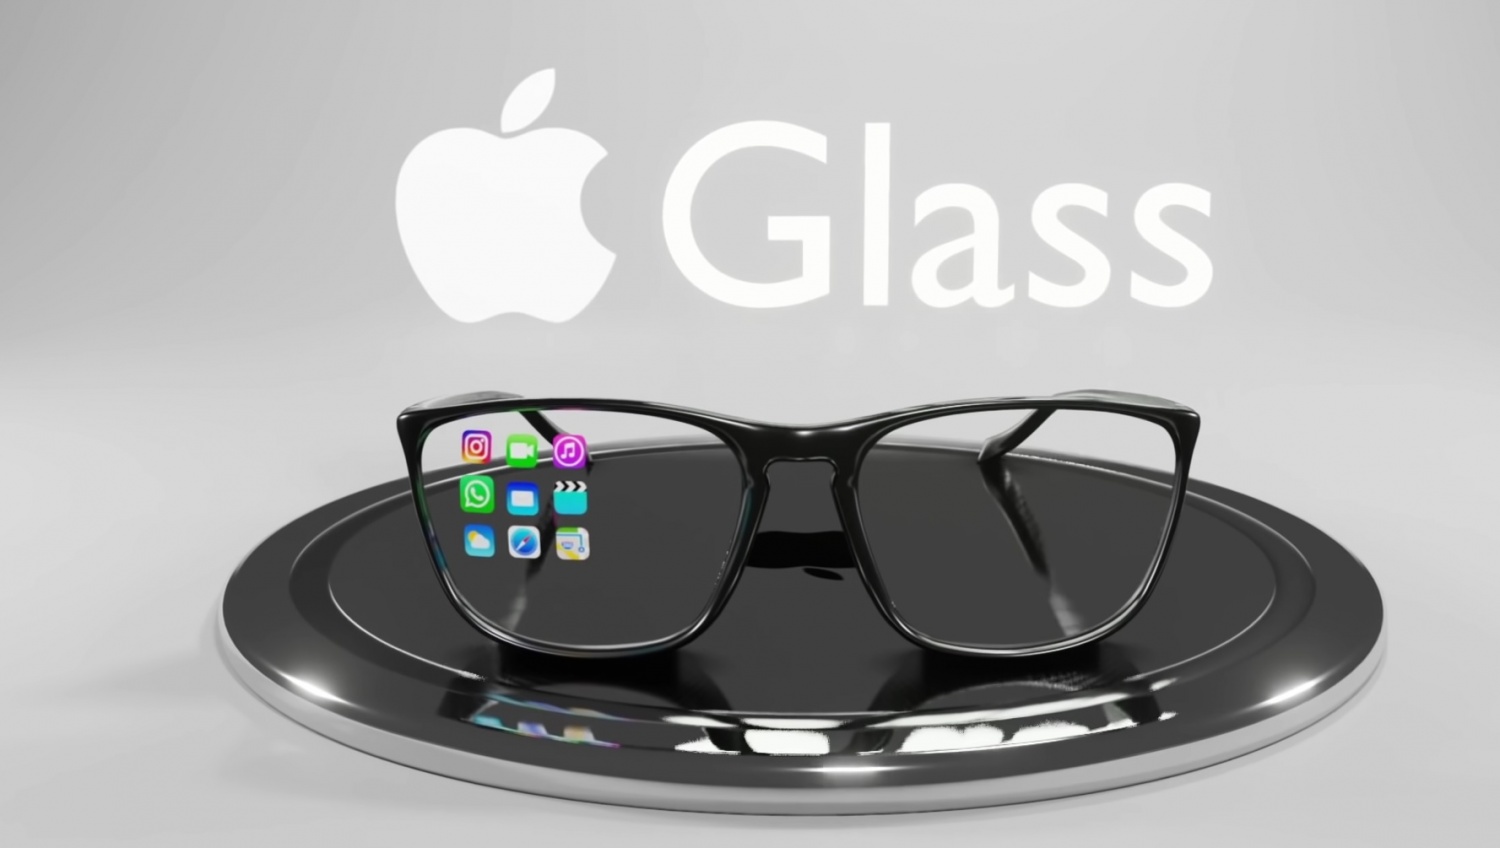 [RUMOR] Apple Glass: Microphones Could Inform the Wearer About Indistinct Audio